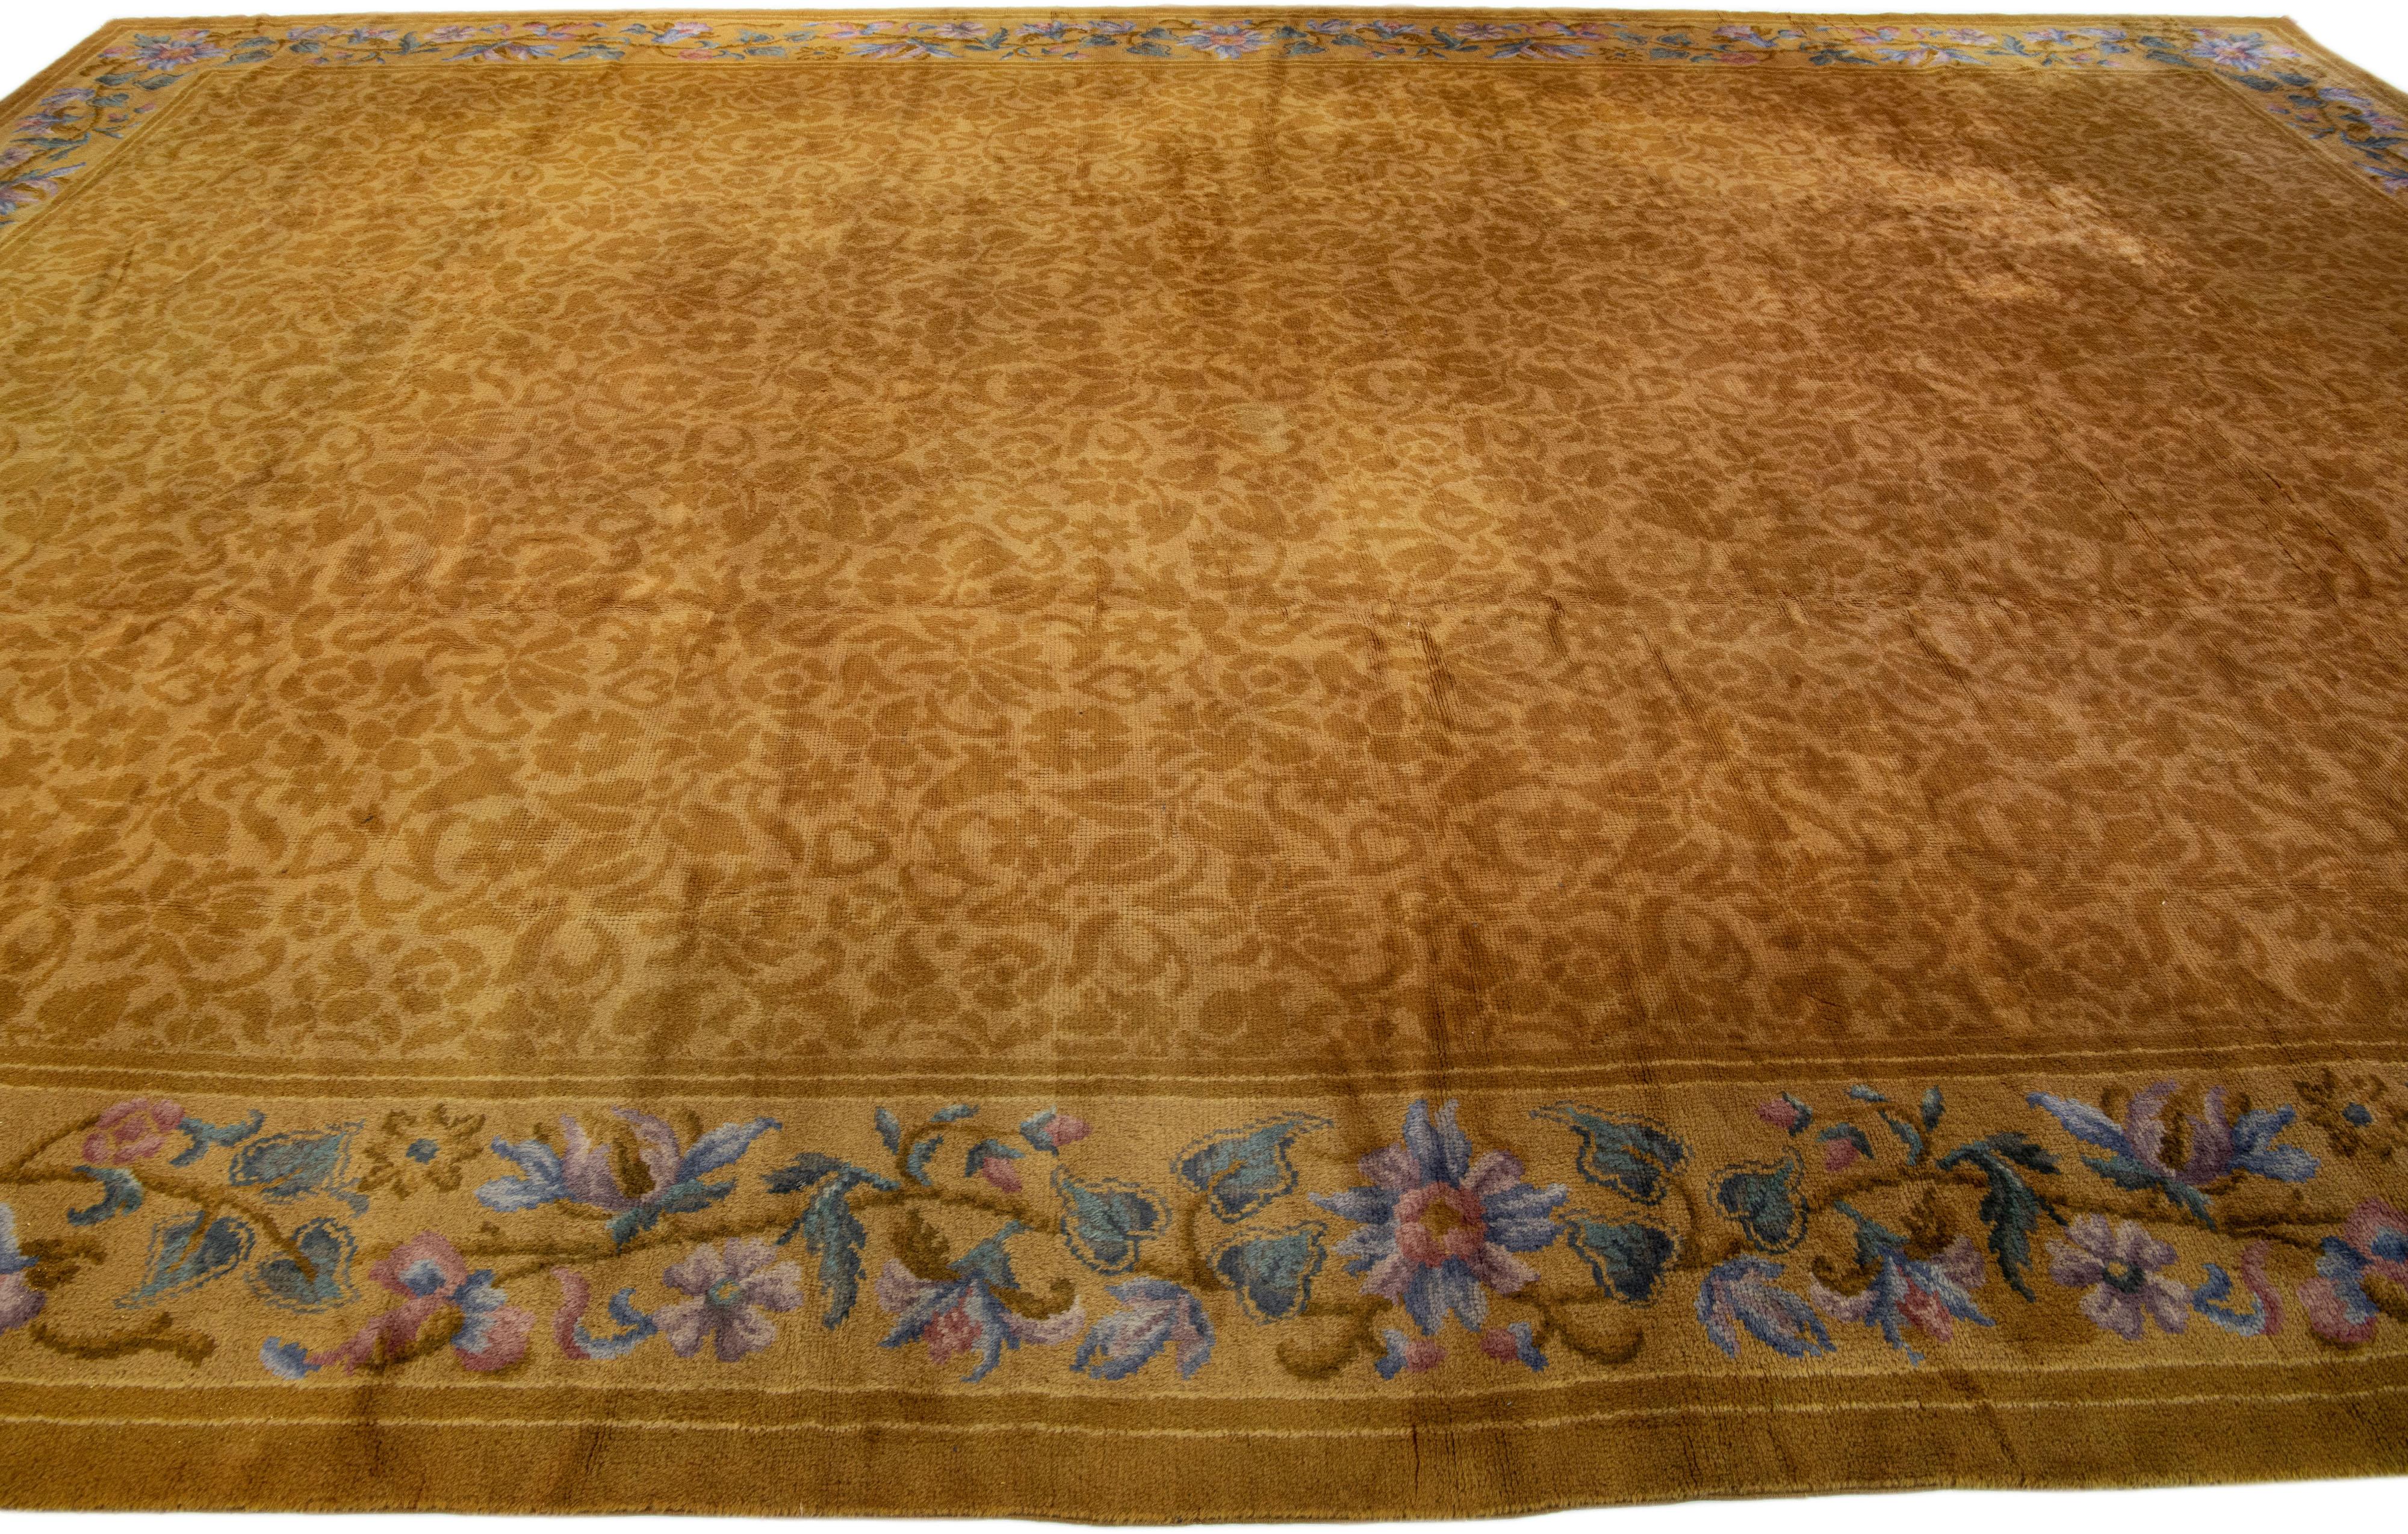 Antique Savonnerie Handmade Golderod Wool Rug with Allover Floral Motif In Excellent Condition For Sale In Norwalk, CT